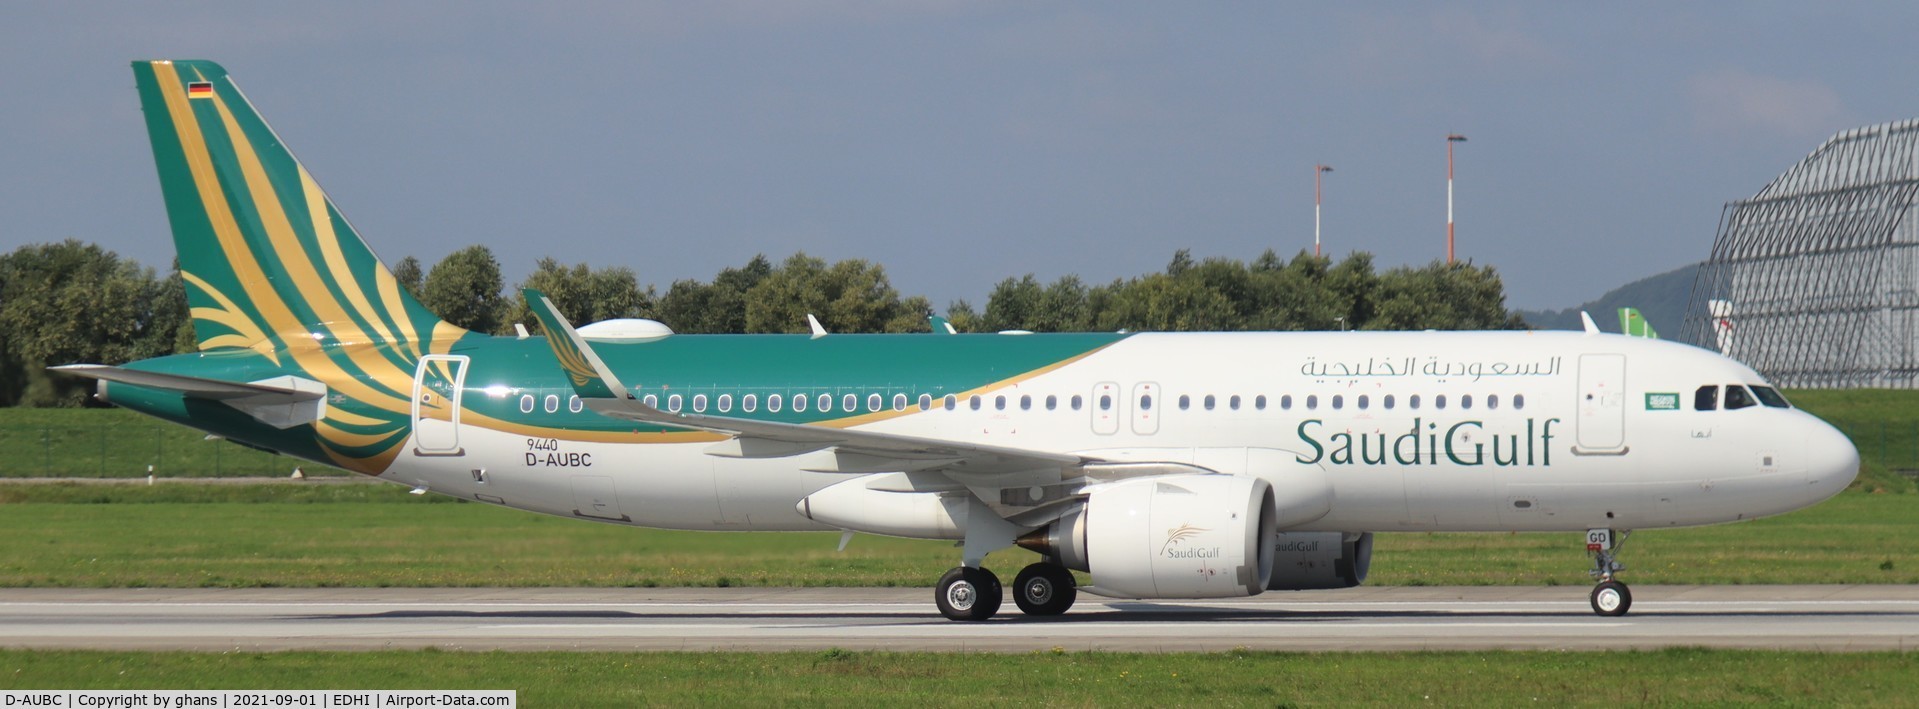 D-AUBC, 2020 Airbus A320-251N C/N 9440, to become VP-CGD